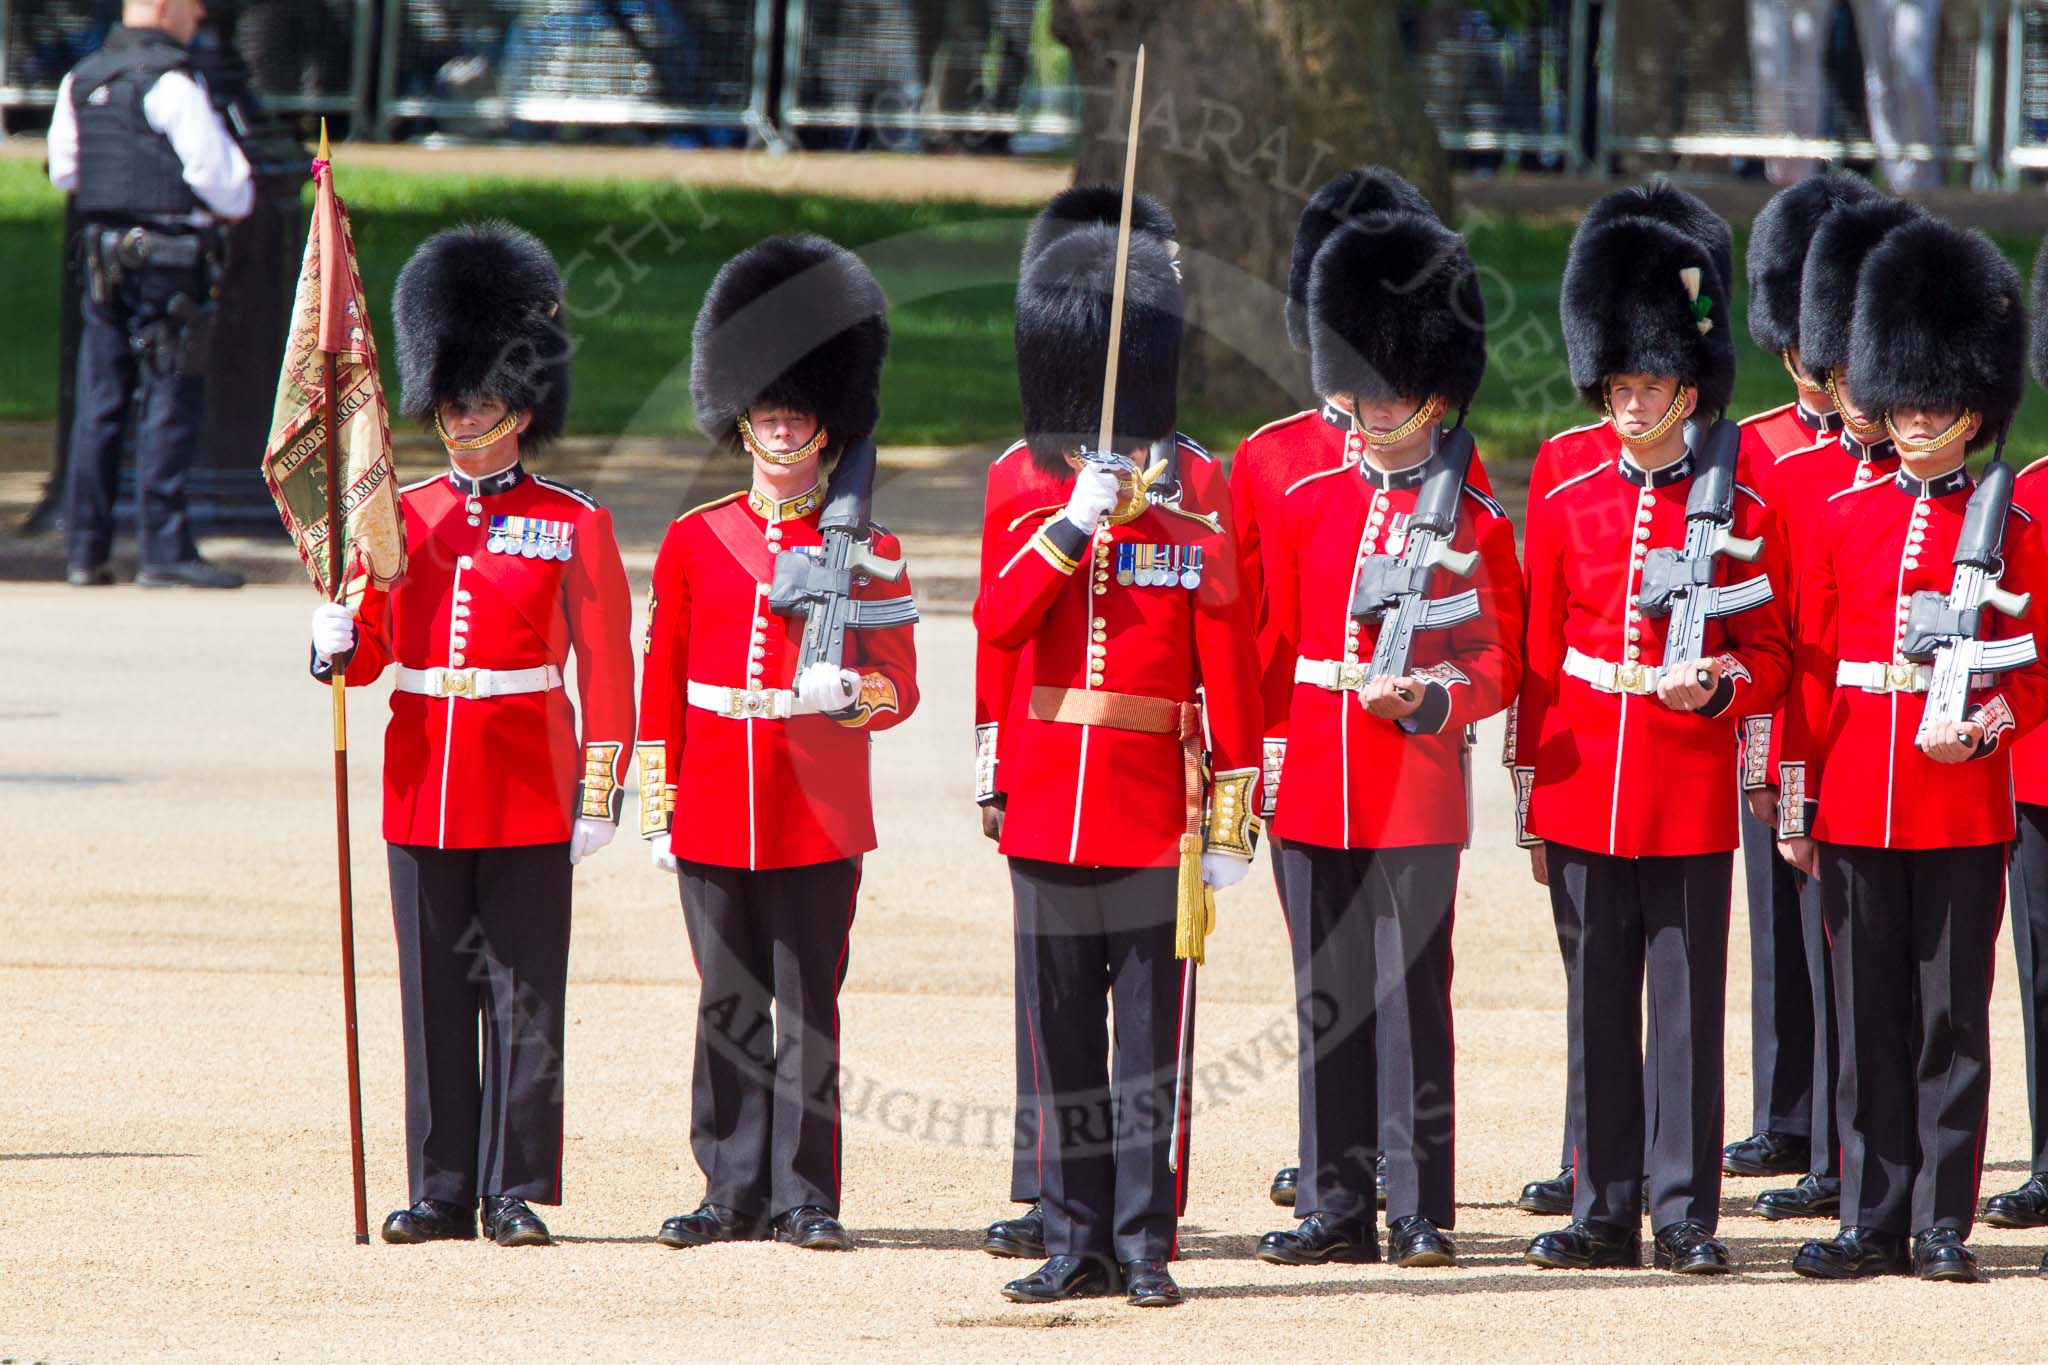 The Colonel's Review 2013.
Horse Guards Parade, Westminster,
London SW1,

United Kingdom,
on 08 June 2013 at 10:42, image #200